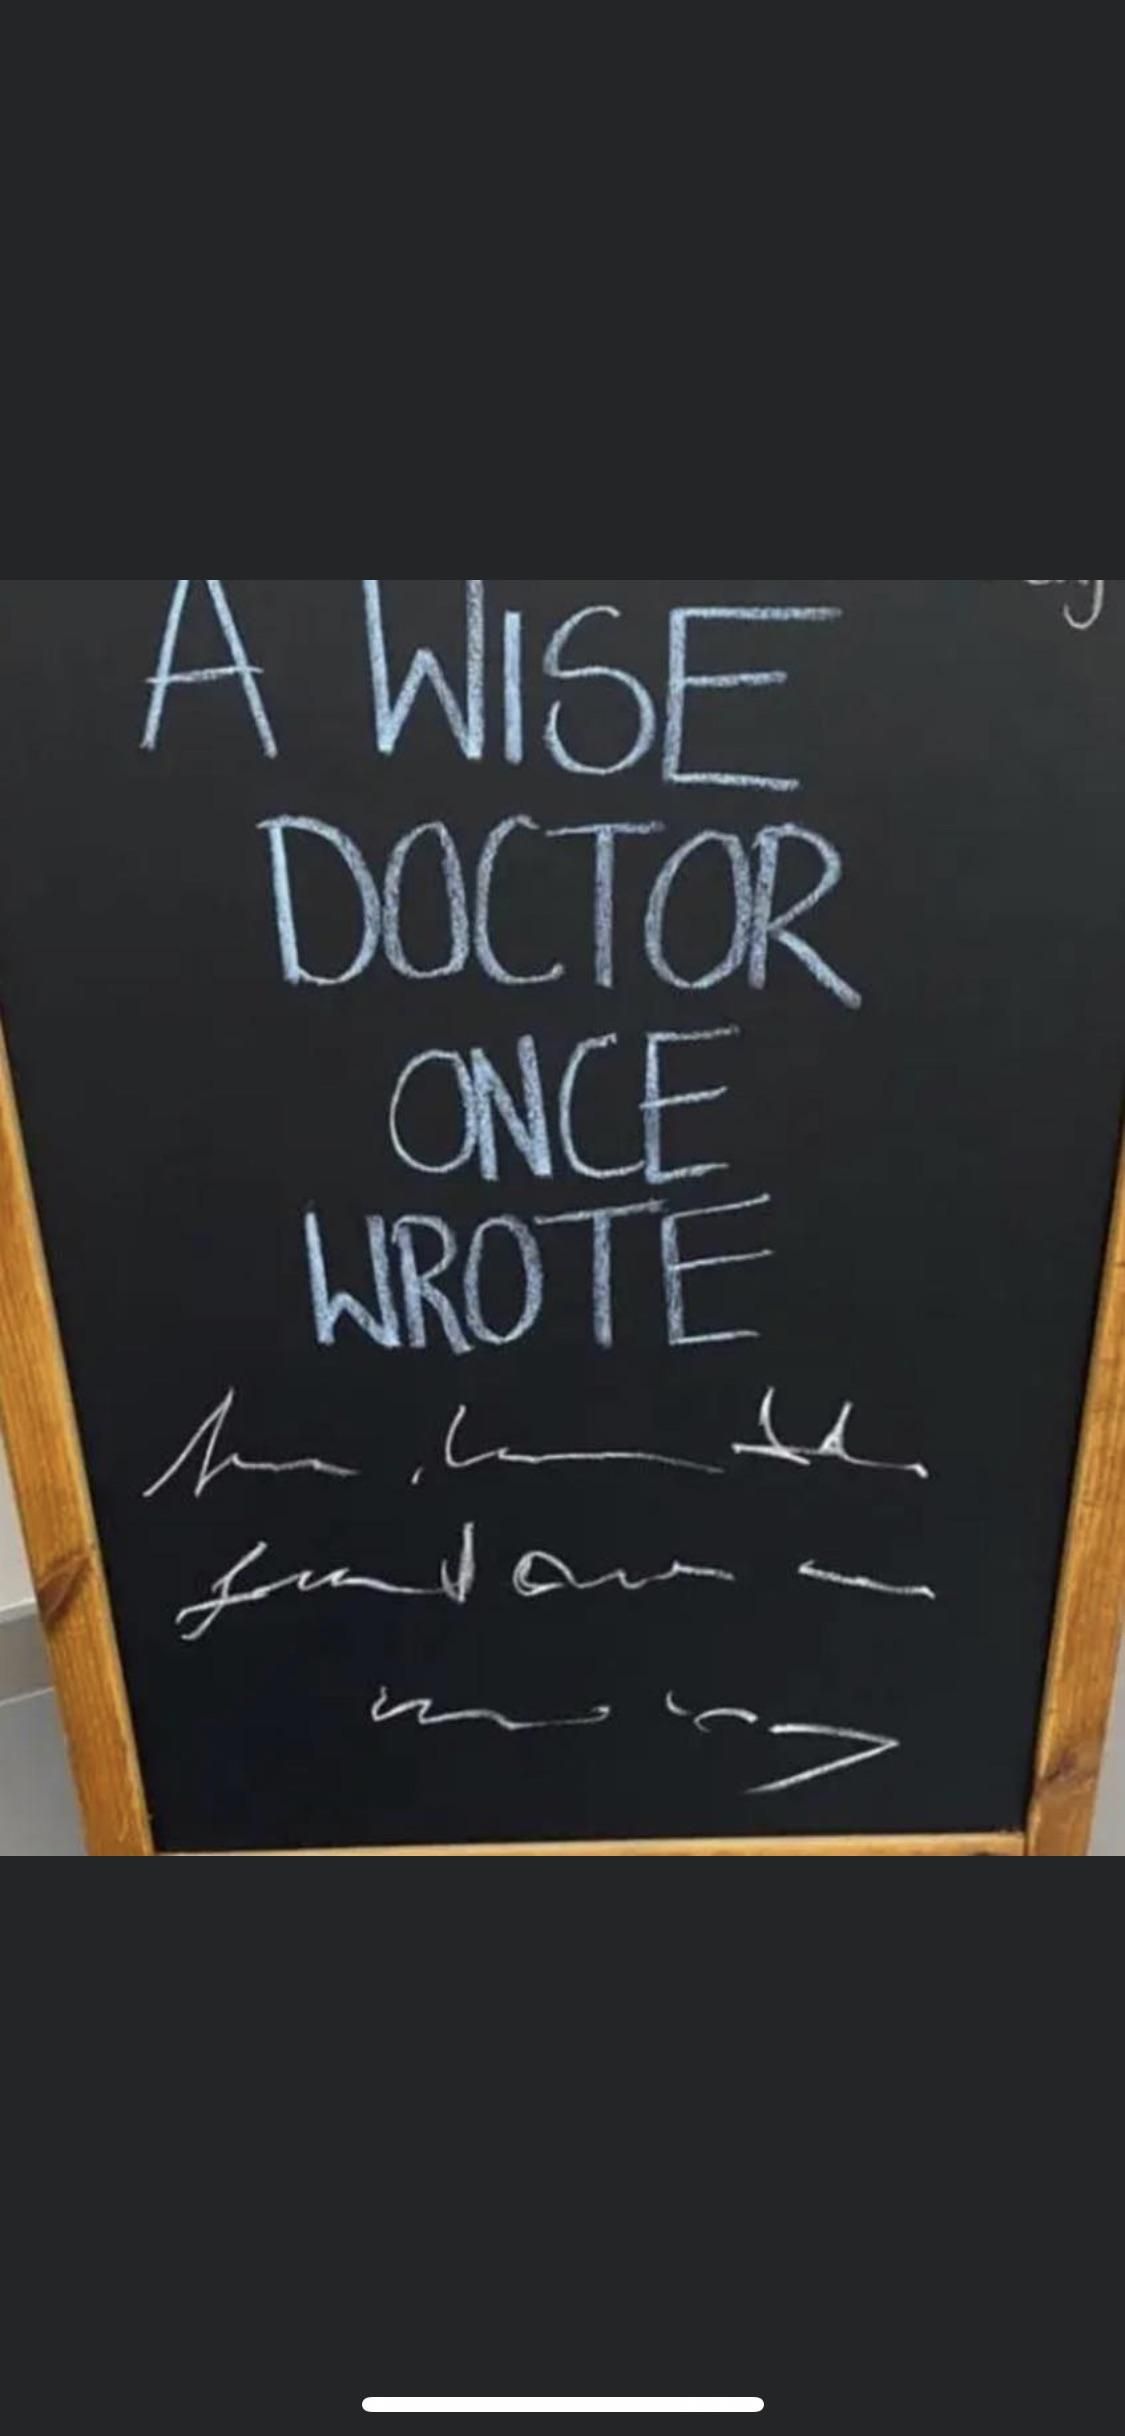 Why are Doctors handwriting is illegible